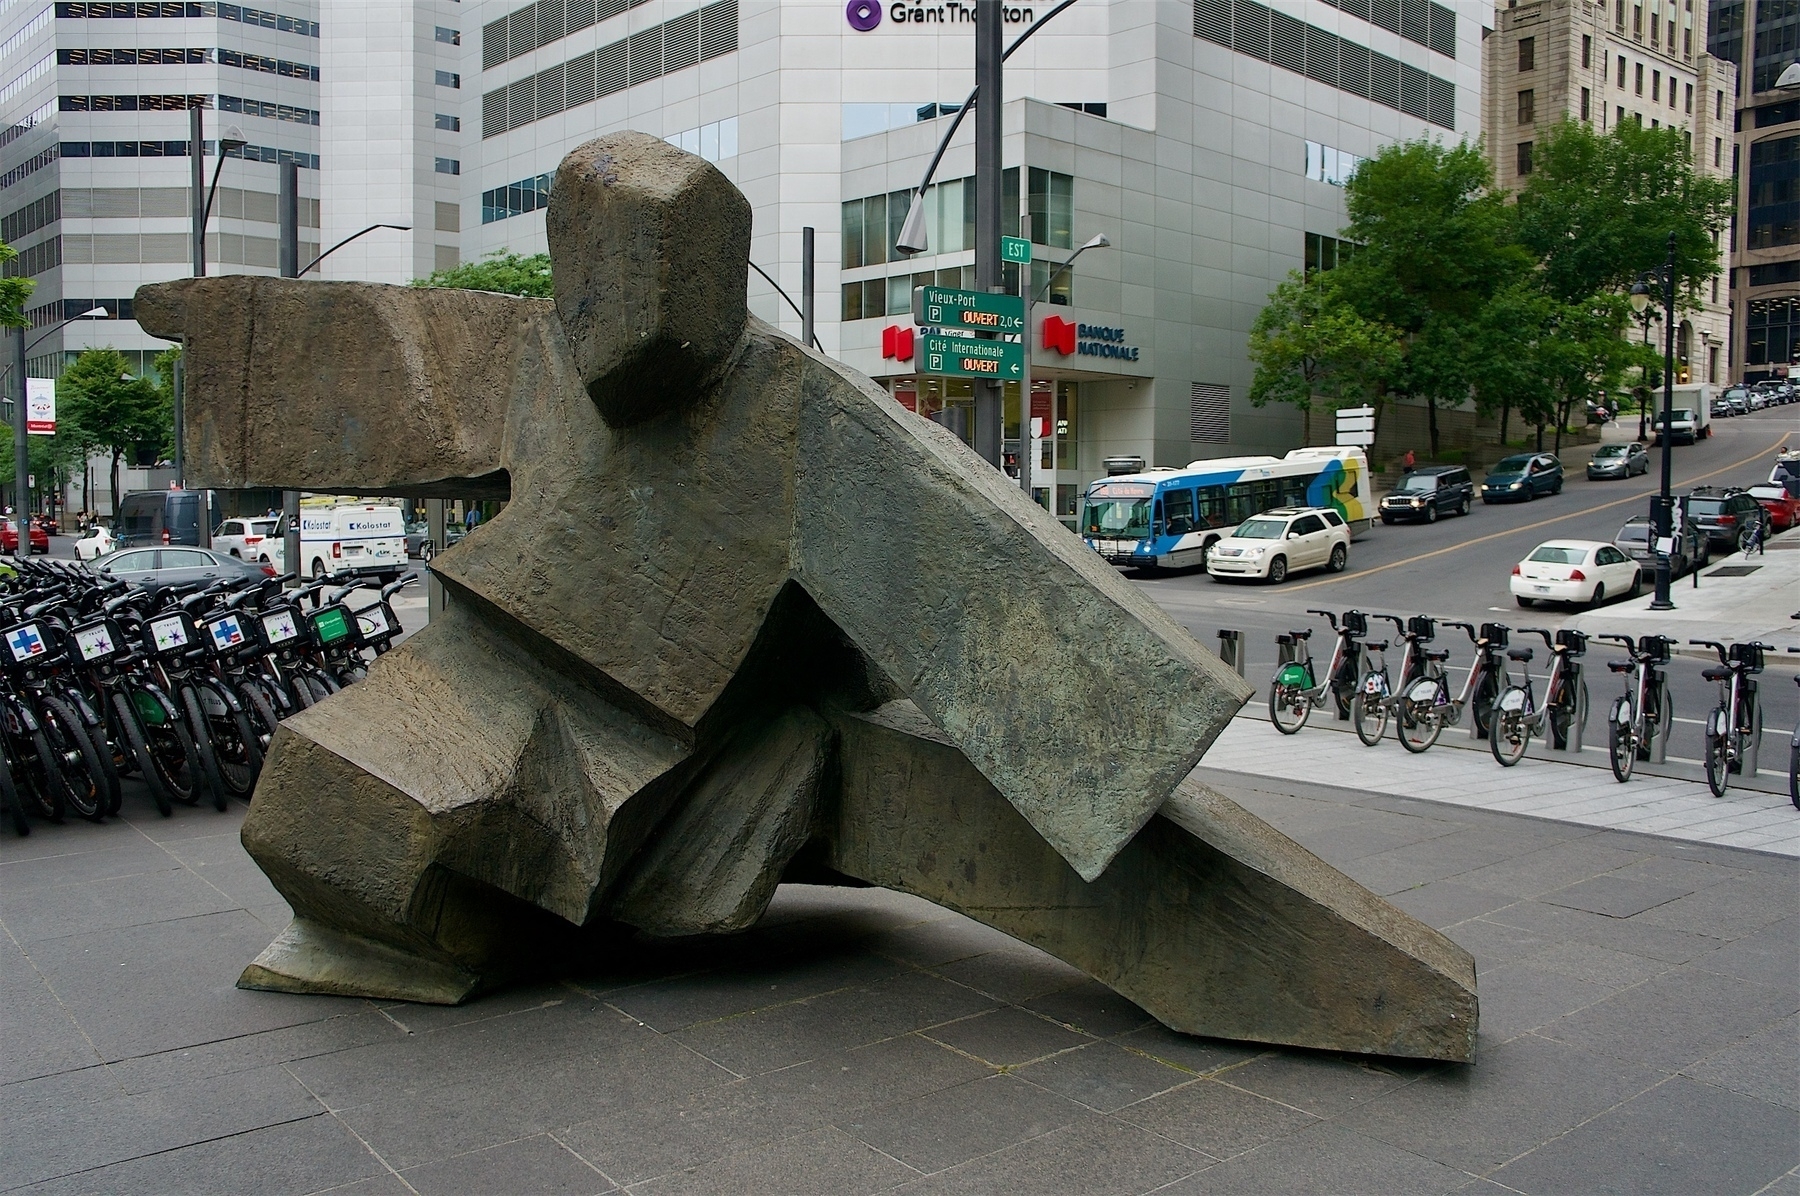 Stone statue in a tai chi pose, with public bikes in the background on the left and cars parked along a street going up a hill in the background on the right.